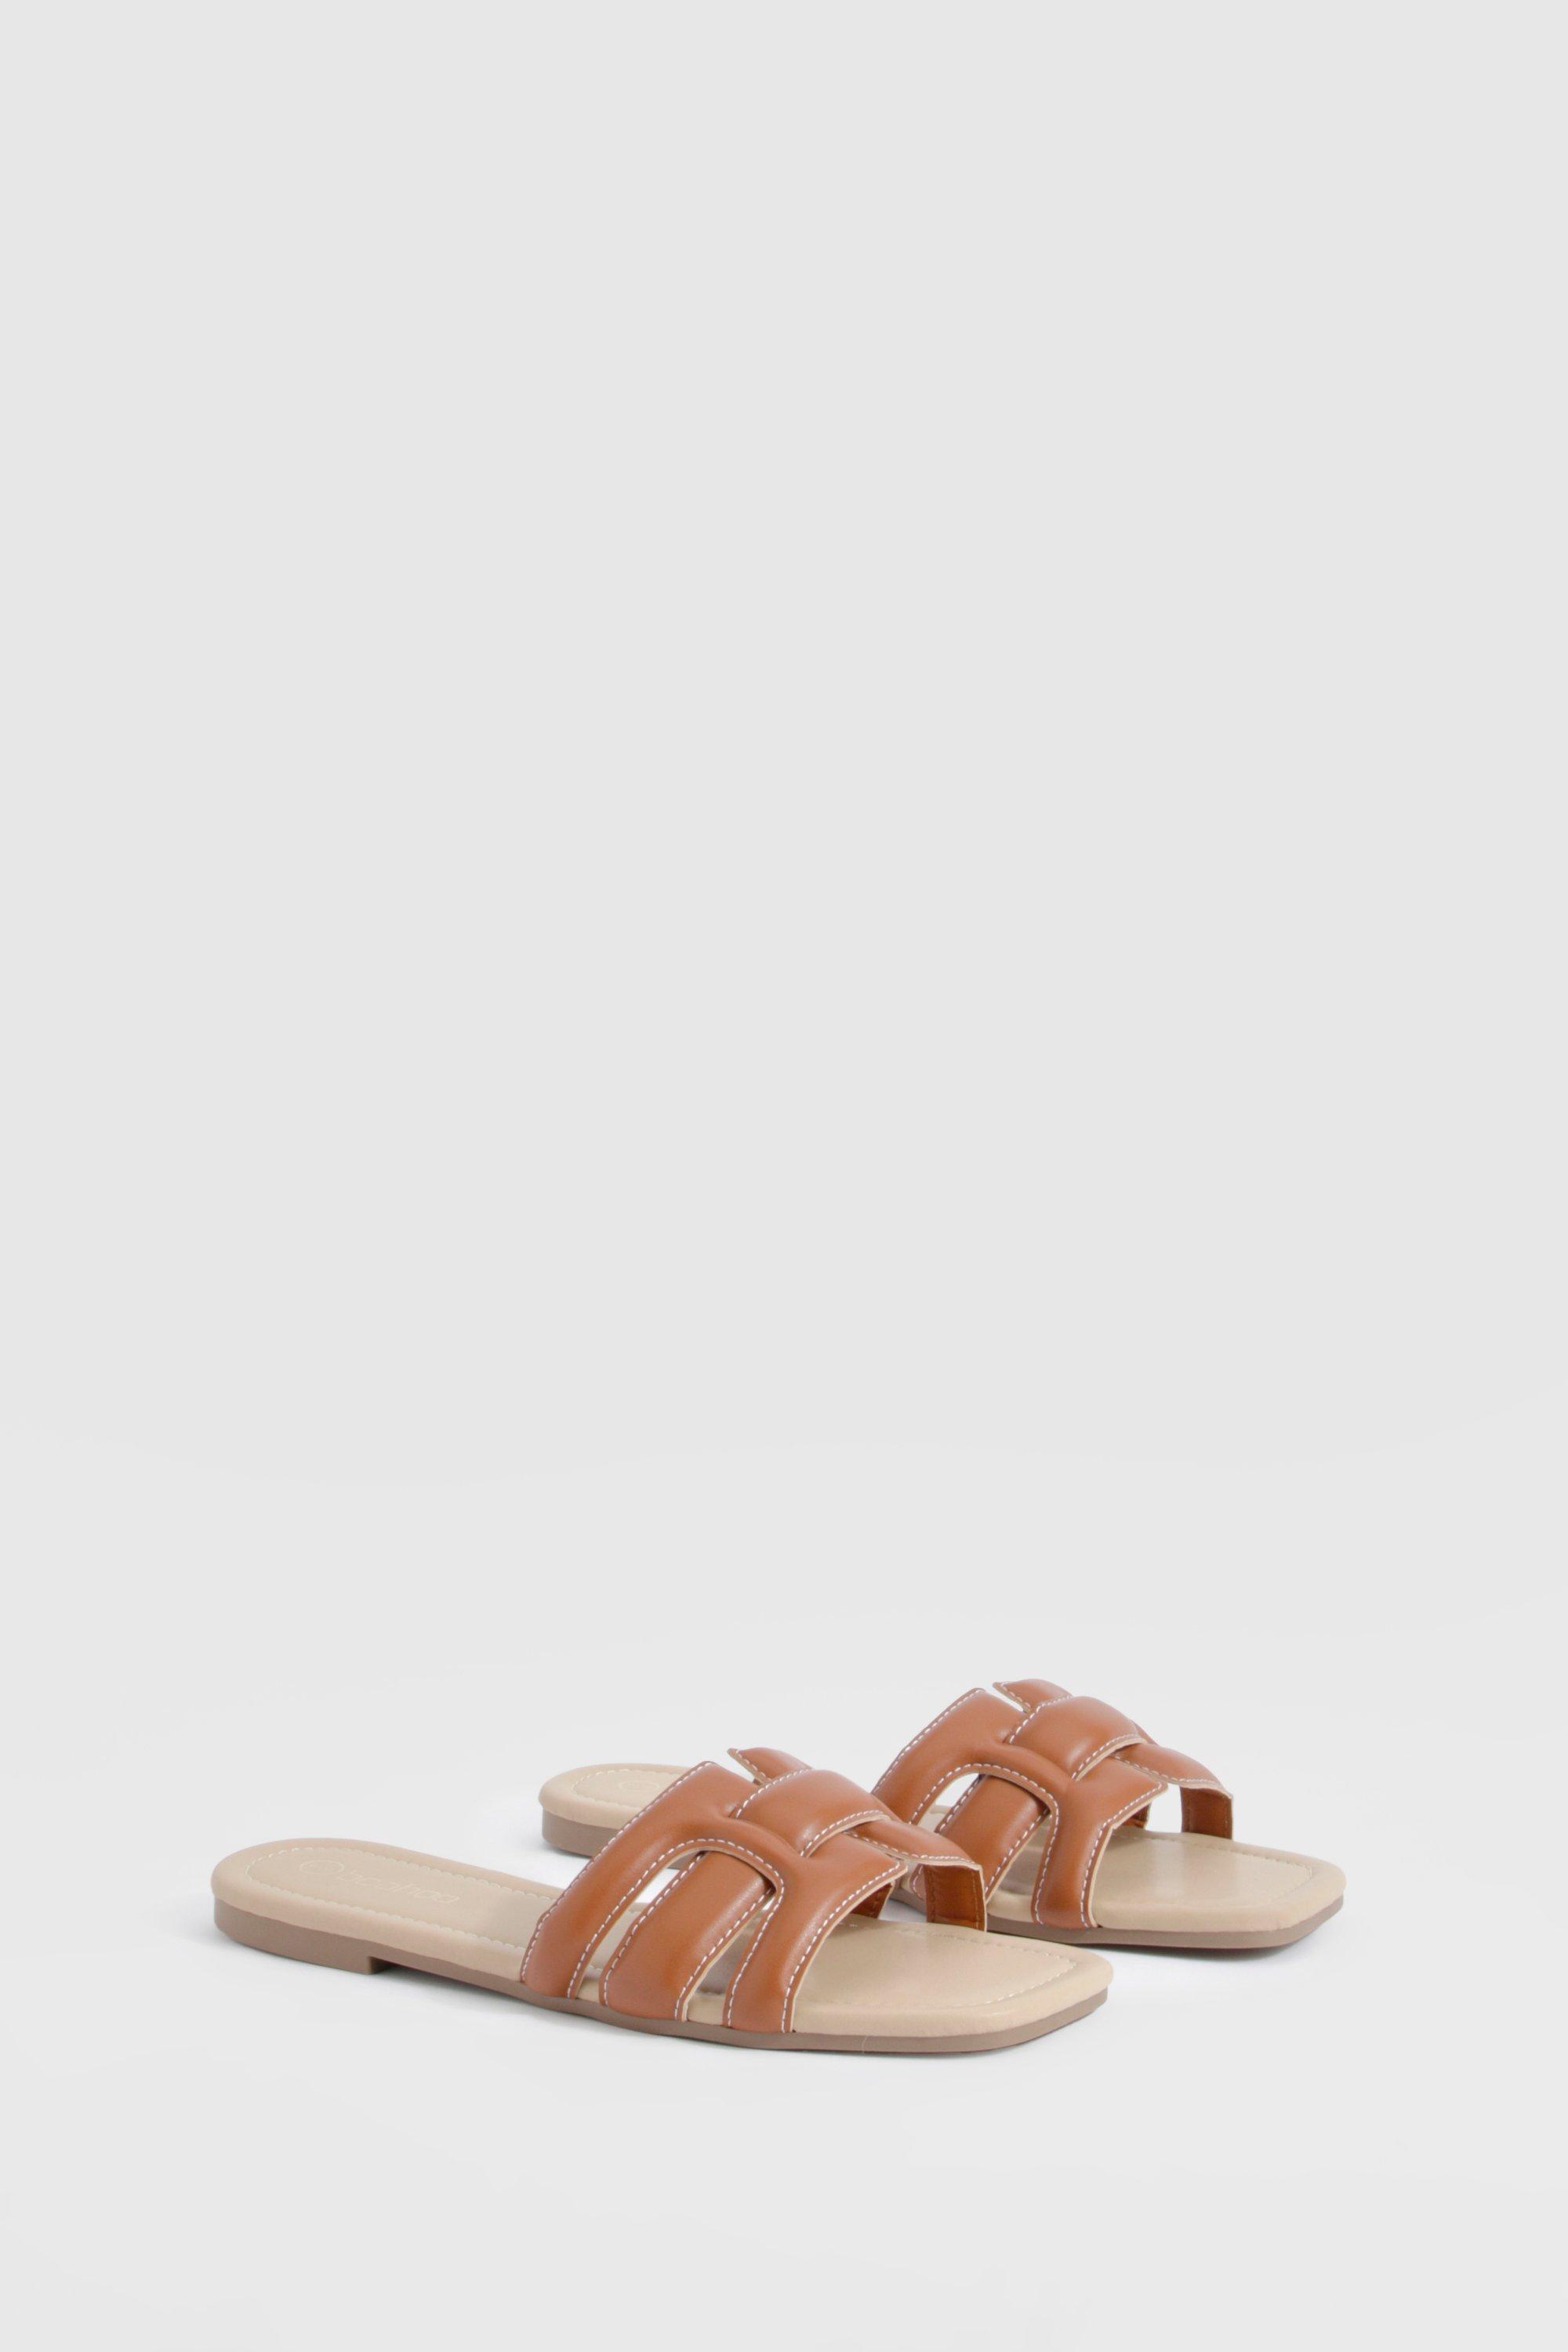 Image of Contrast Stitch Woven Mule Sandals, Brown